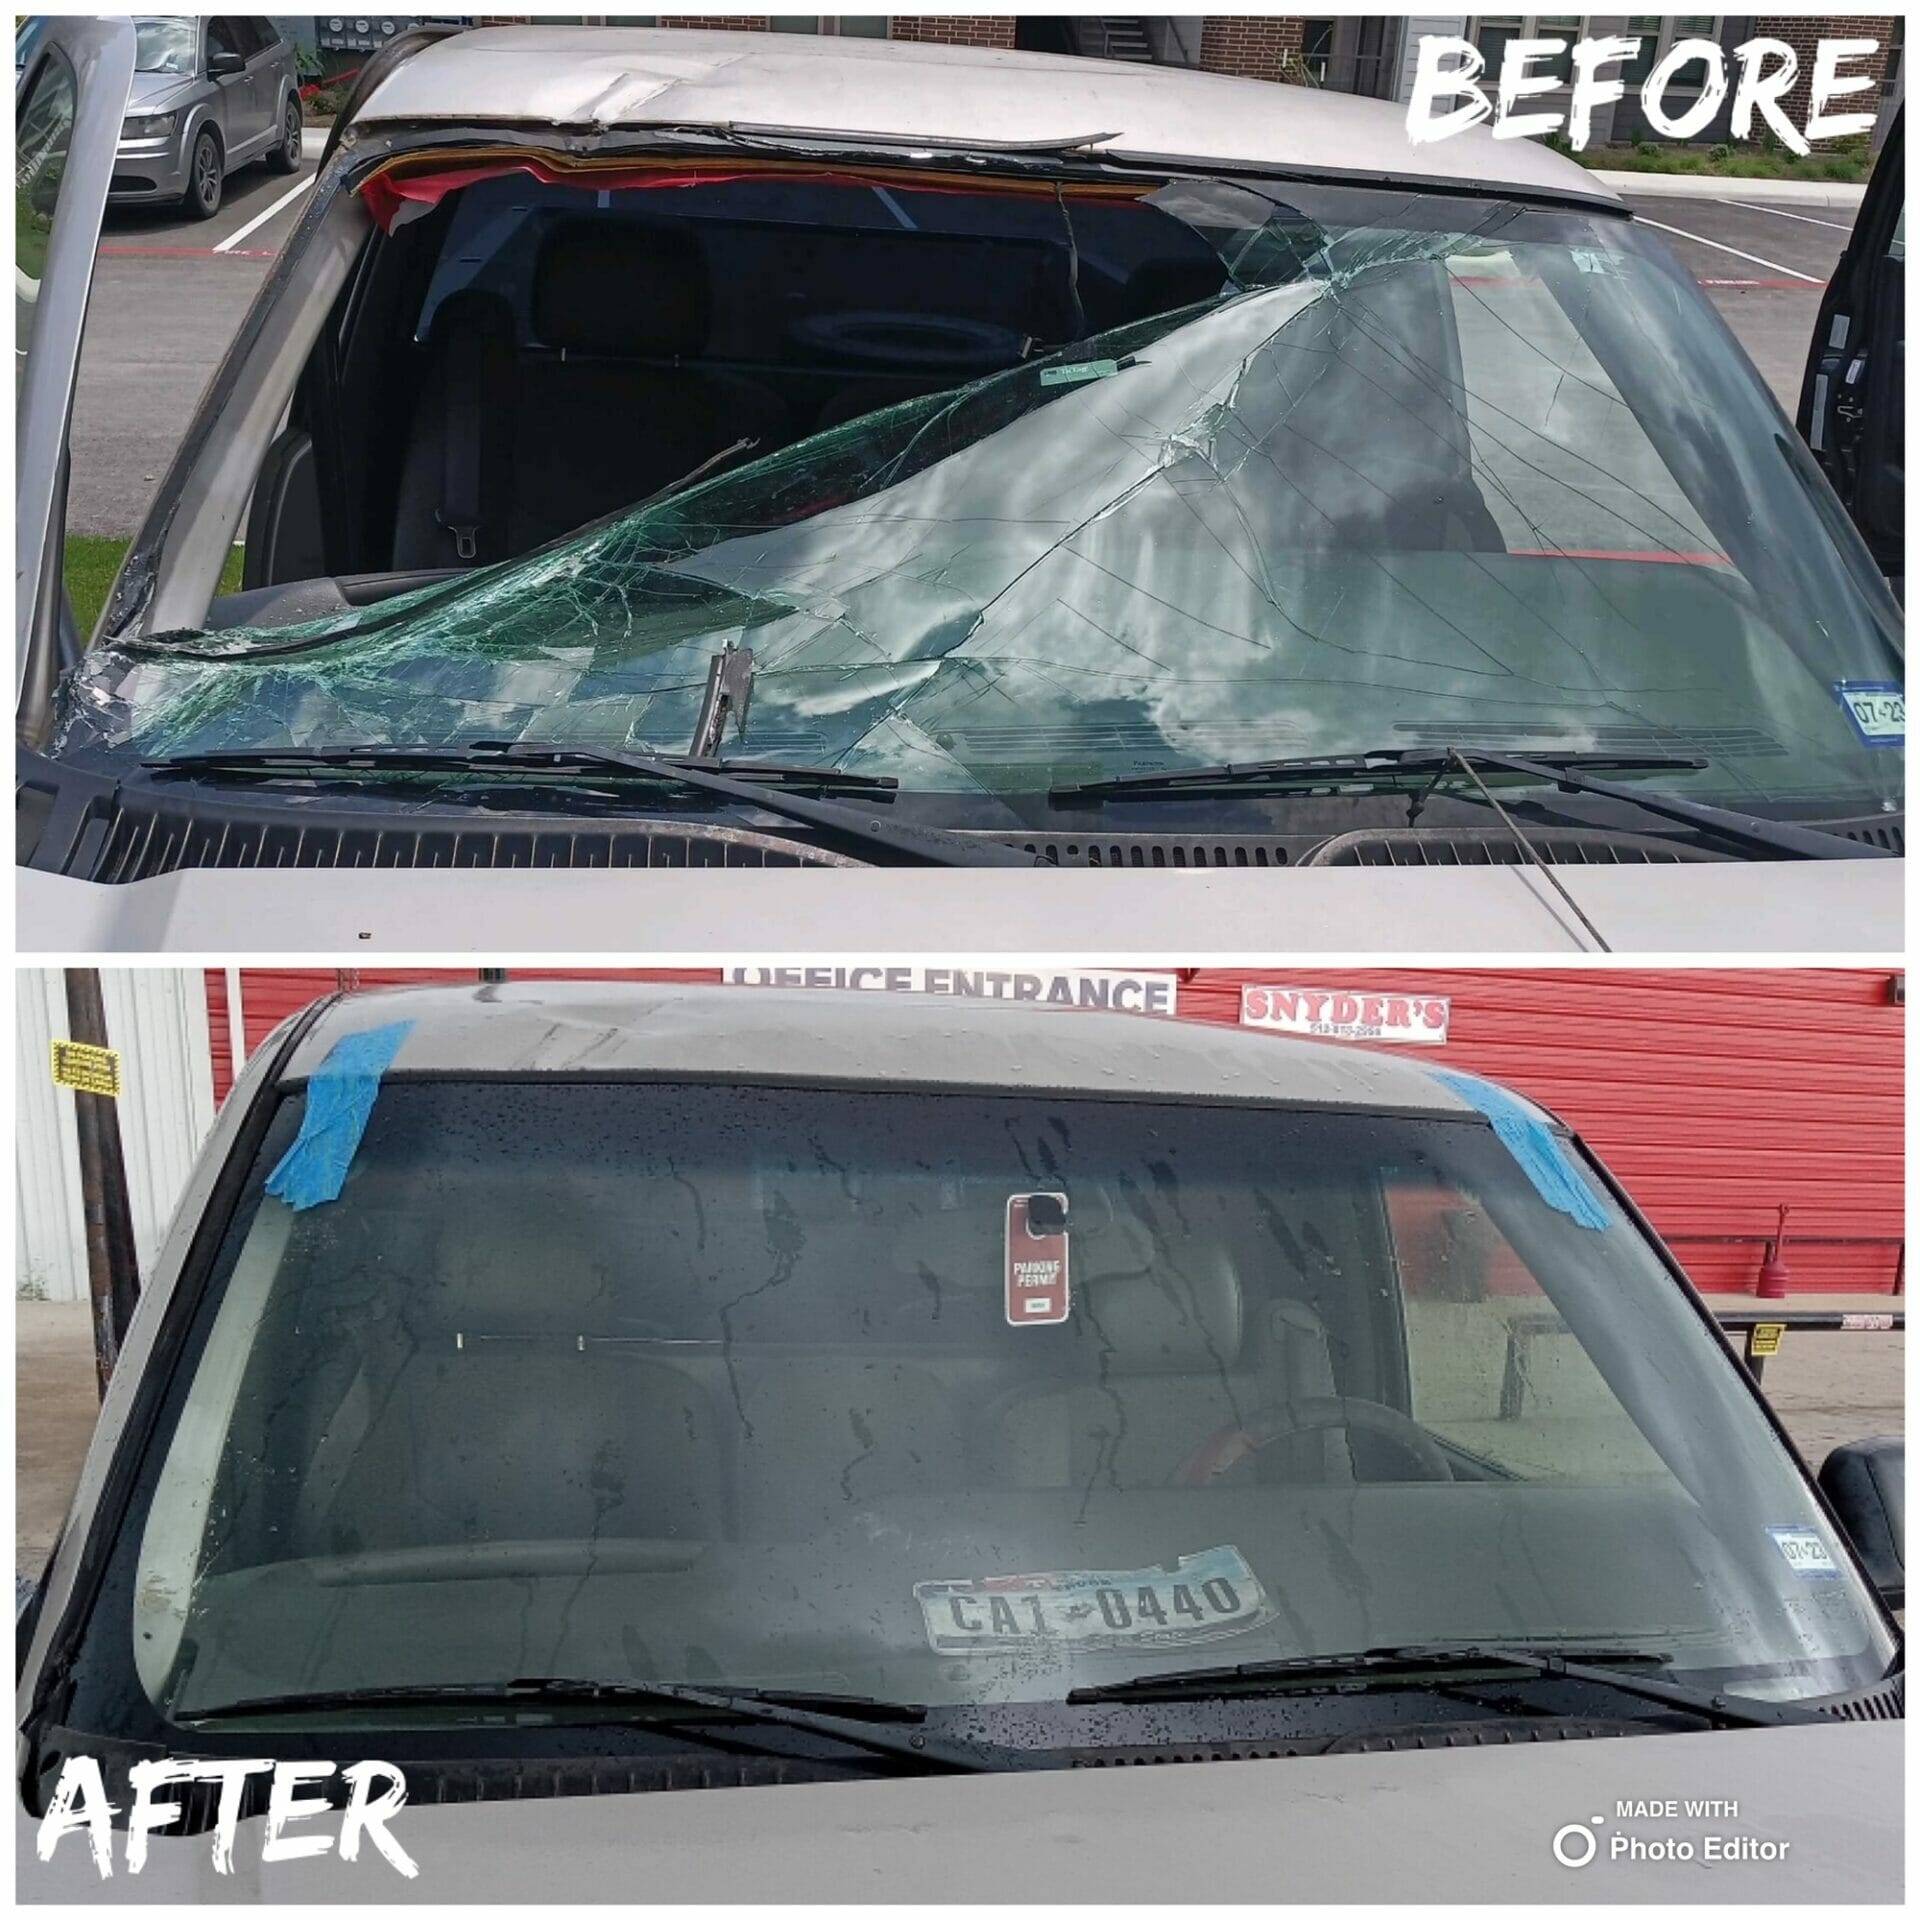 This split image shows the significant transformation of a sedan in East San Antonio, Texas, whose front windshield was completely shattered and partially removed due to a car accident. The top half depicts the damage prior to the repair, with fragments of the windshield visibly missing. The bottom half of the image displays the vehicle post-repair, exhibiting the newly replaced and intact windshield. The drastic change emphasizes the necessity of full replacement and quality workmanship offered by our home auto glass service.